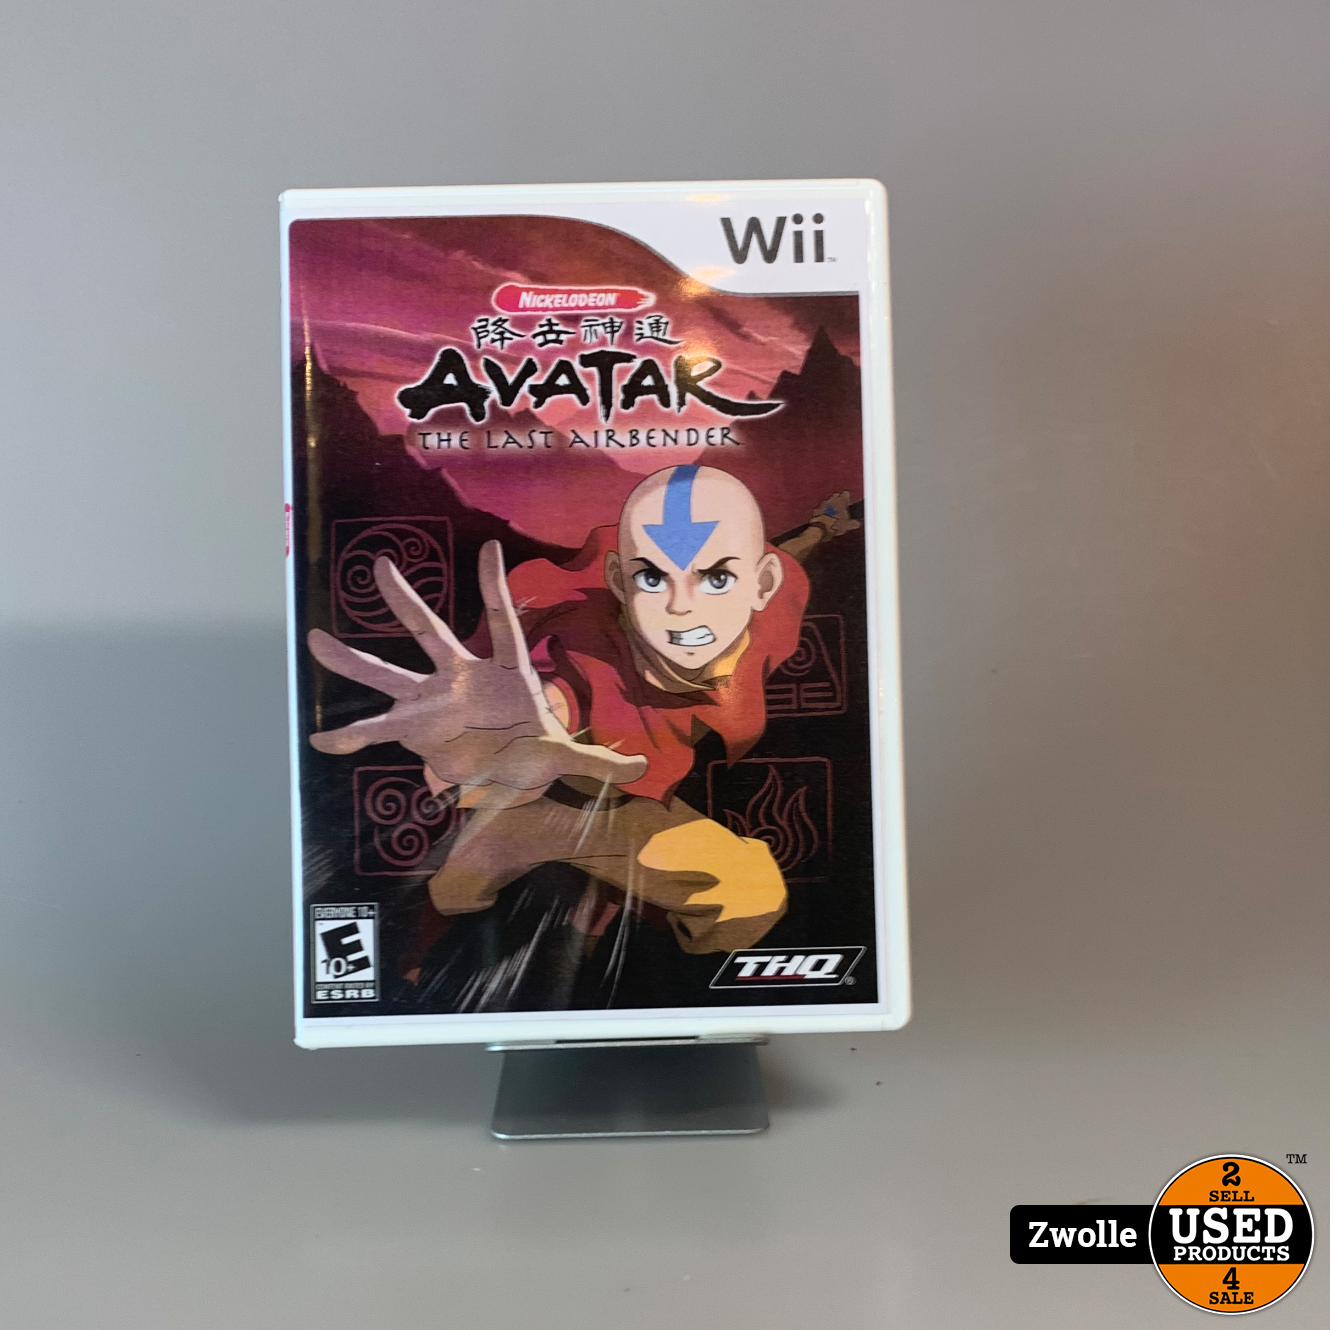 nintendo Nintendo WII Game Avatar The Last Airbender Used Products